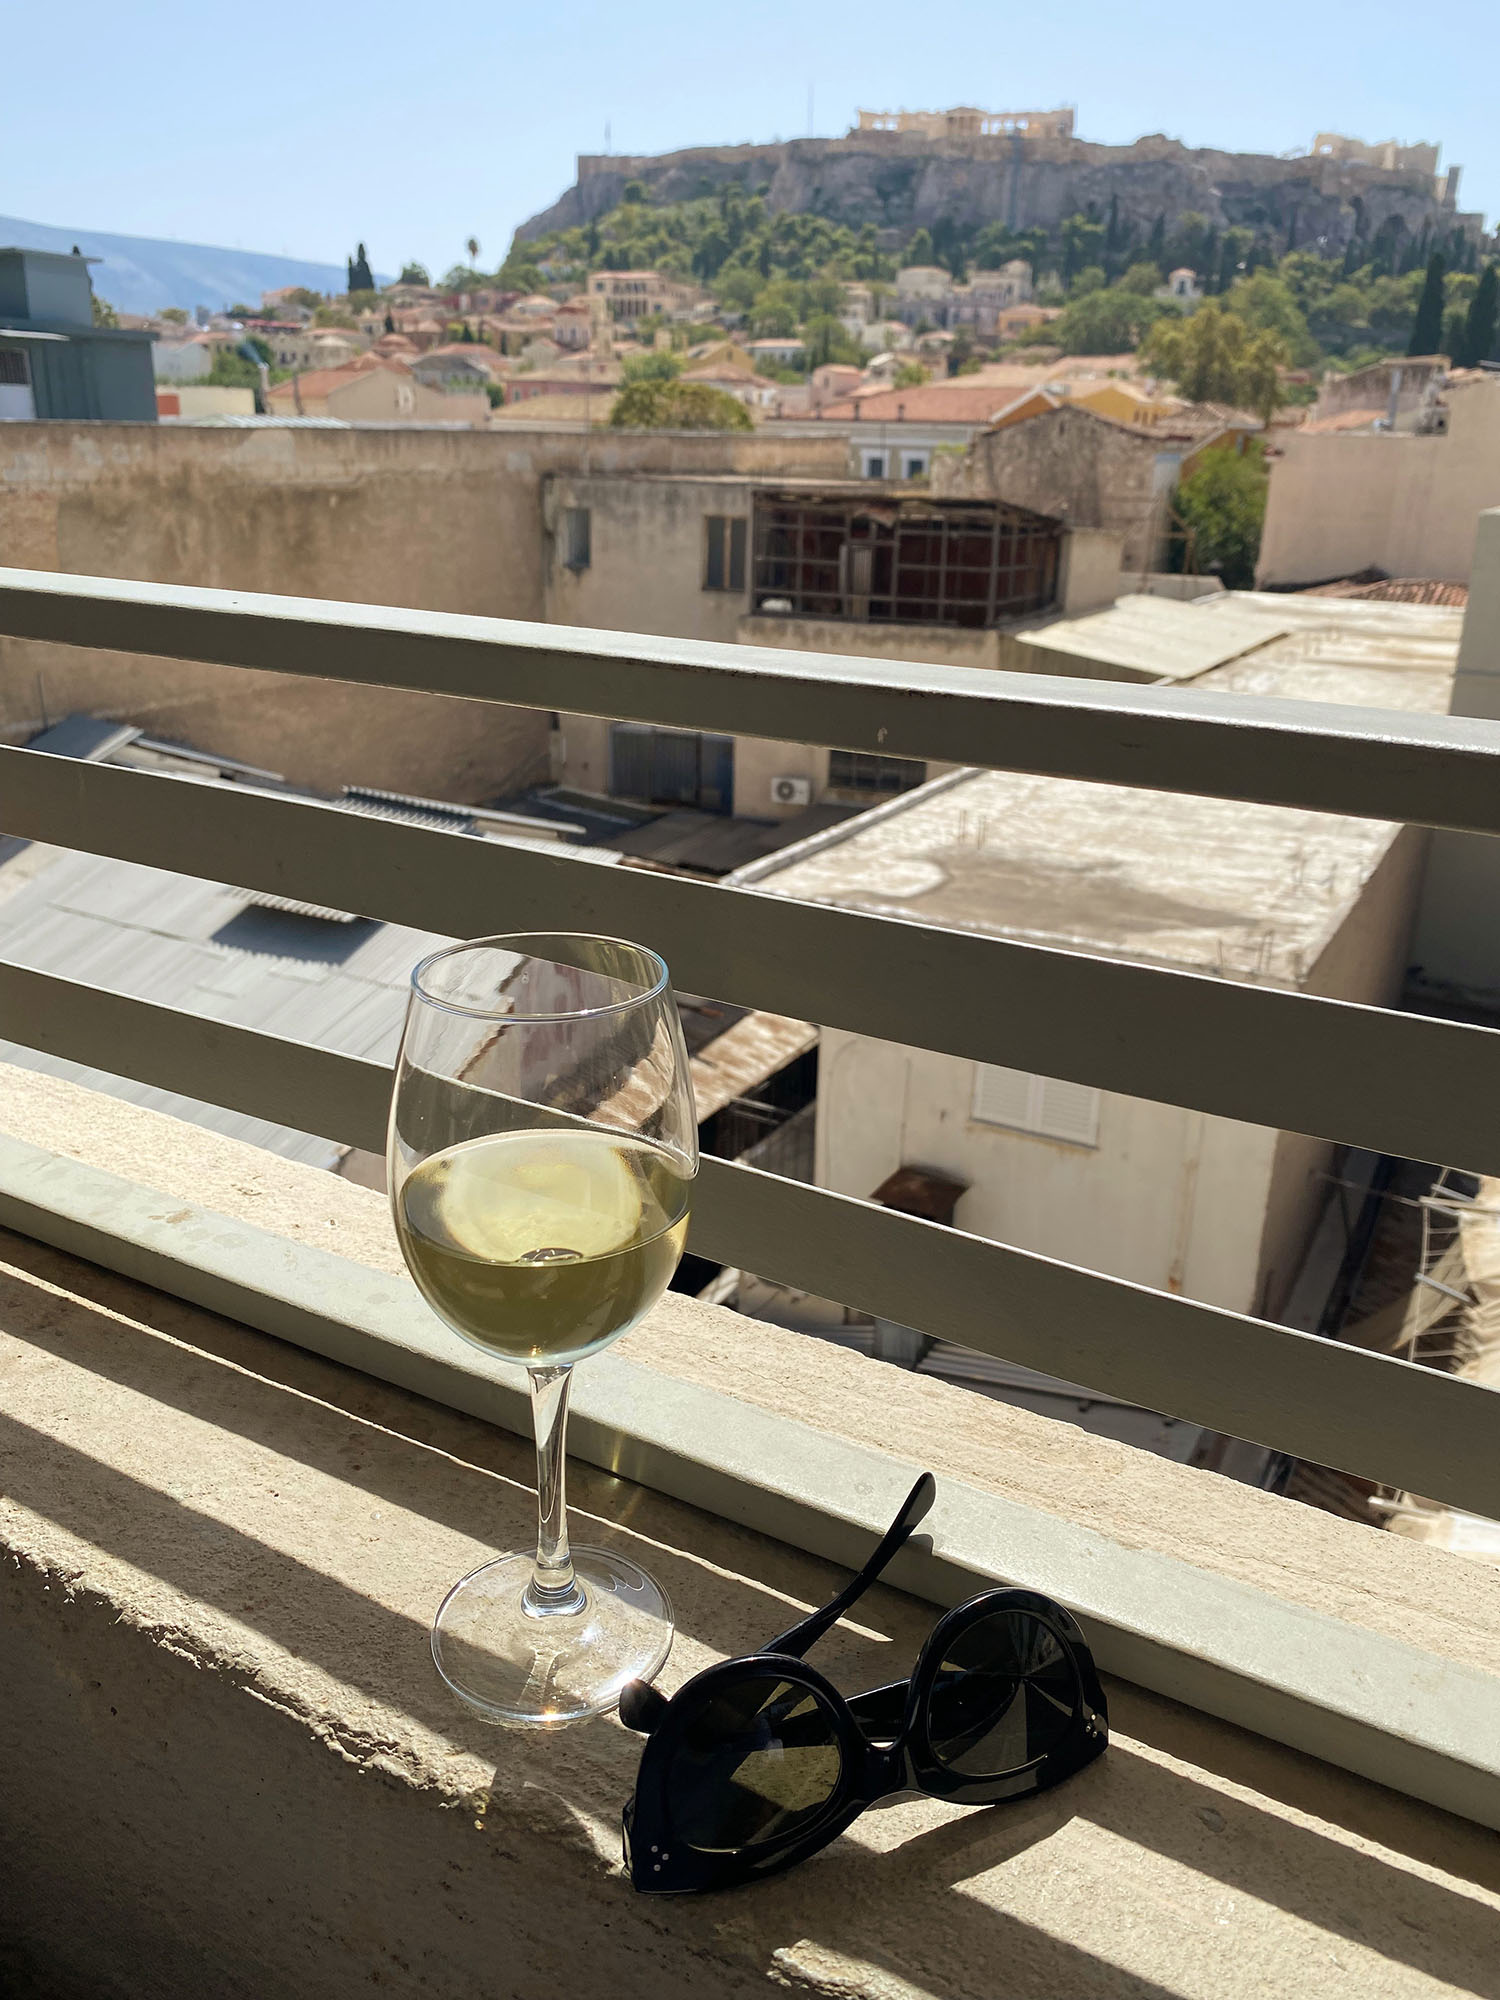 Coco & Vera - White wine and Celine sunglasses at Couleur Locale overlooking Acropolis in Athens